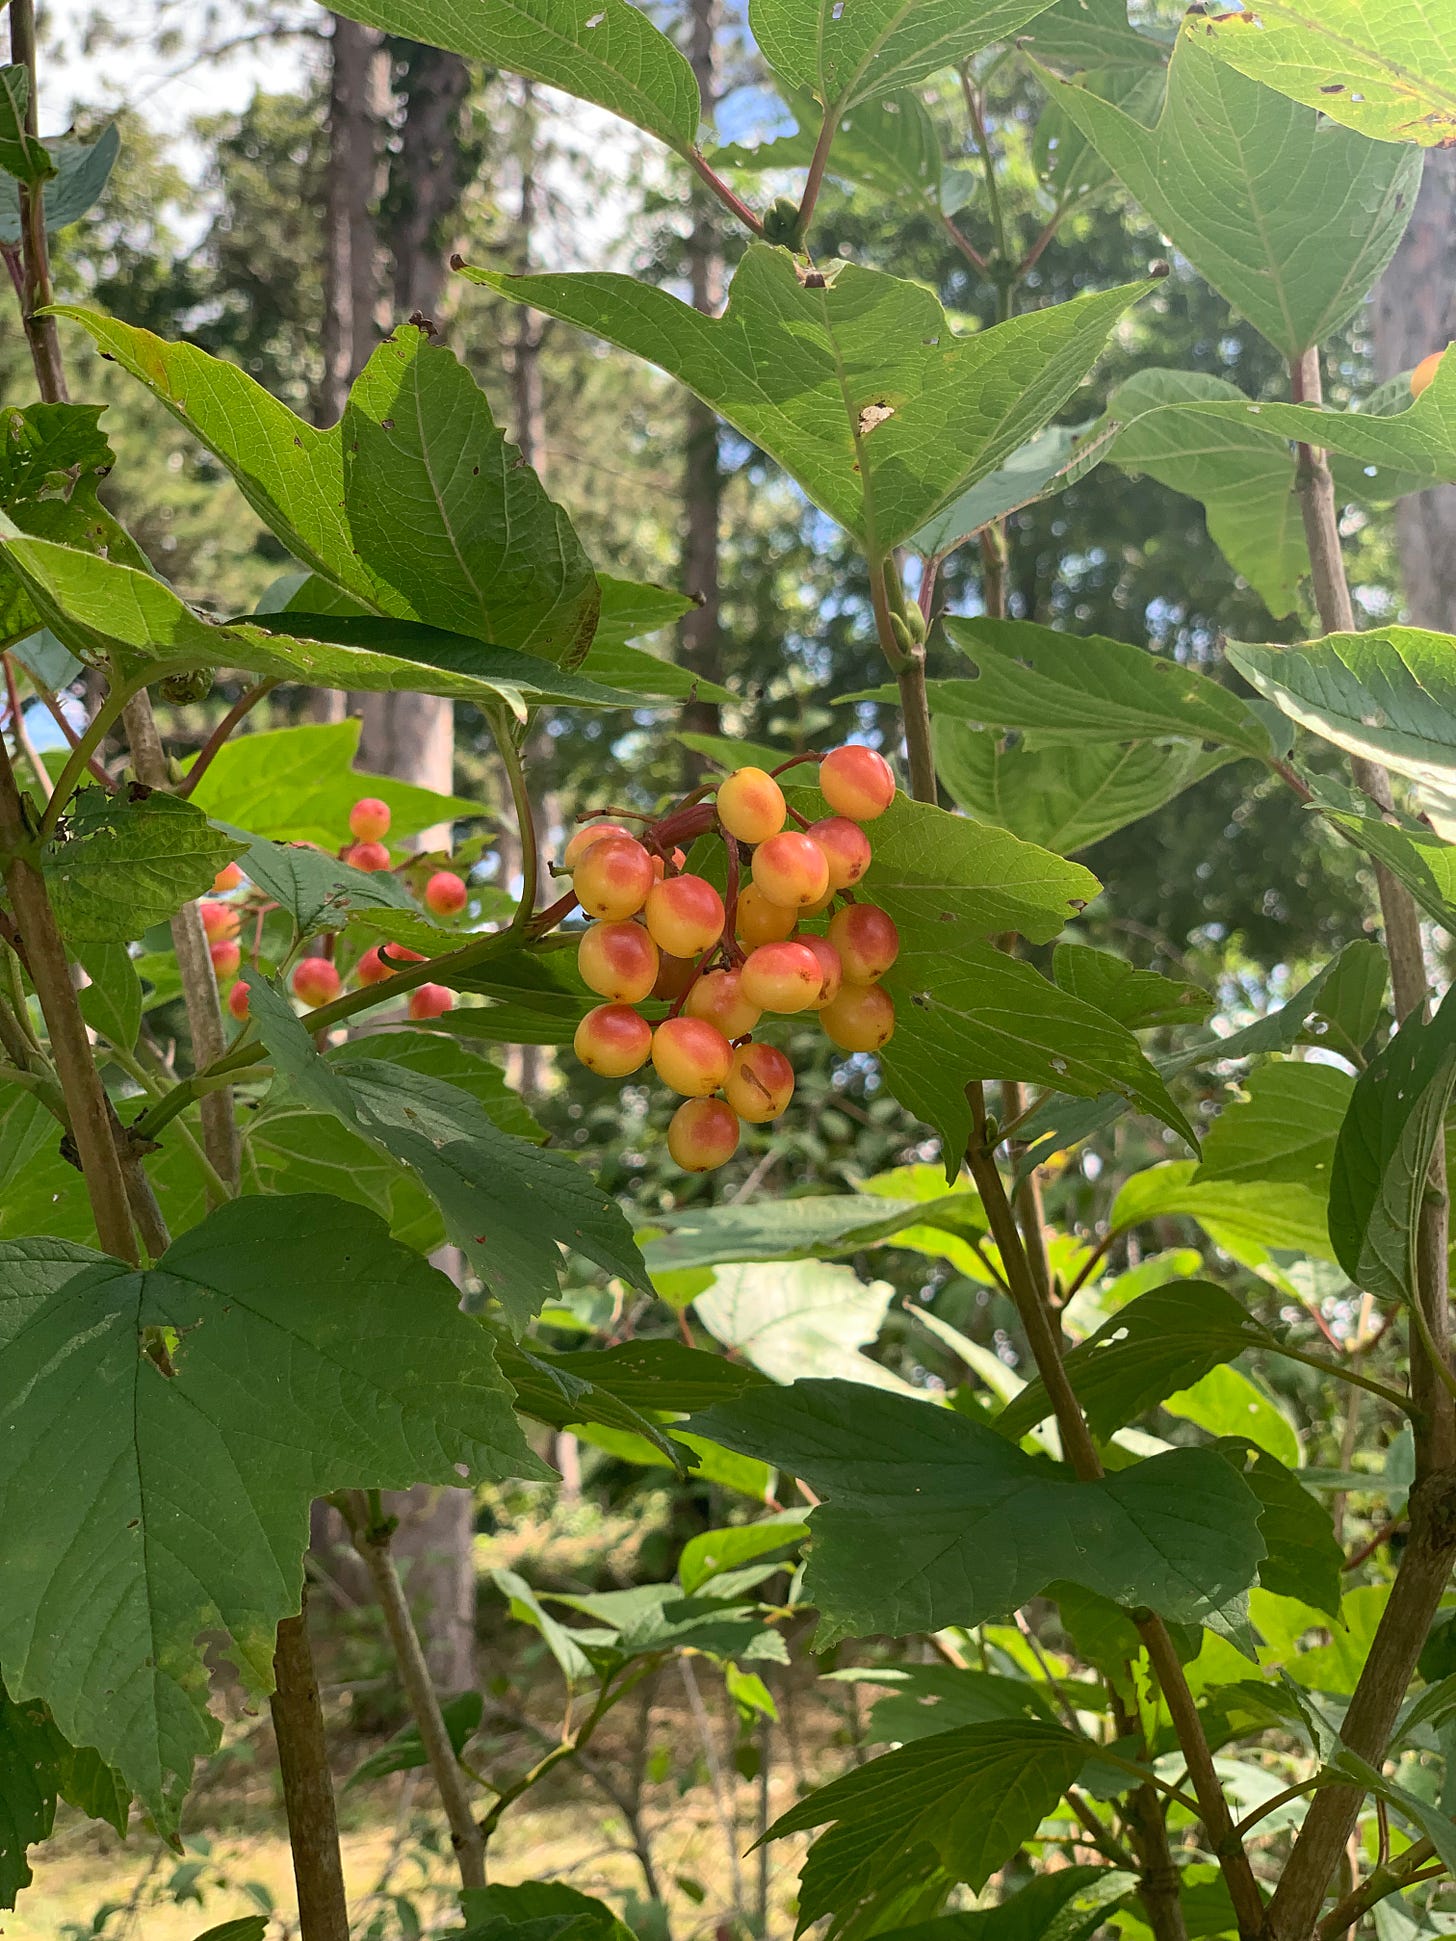 A bush with green leaves that has clusters of yellow and orange berries.